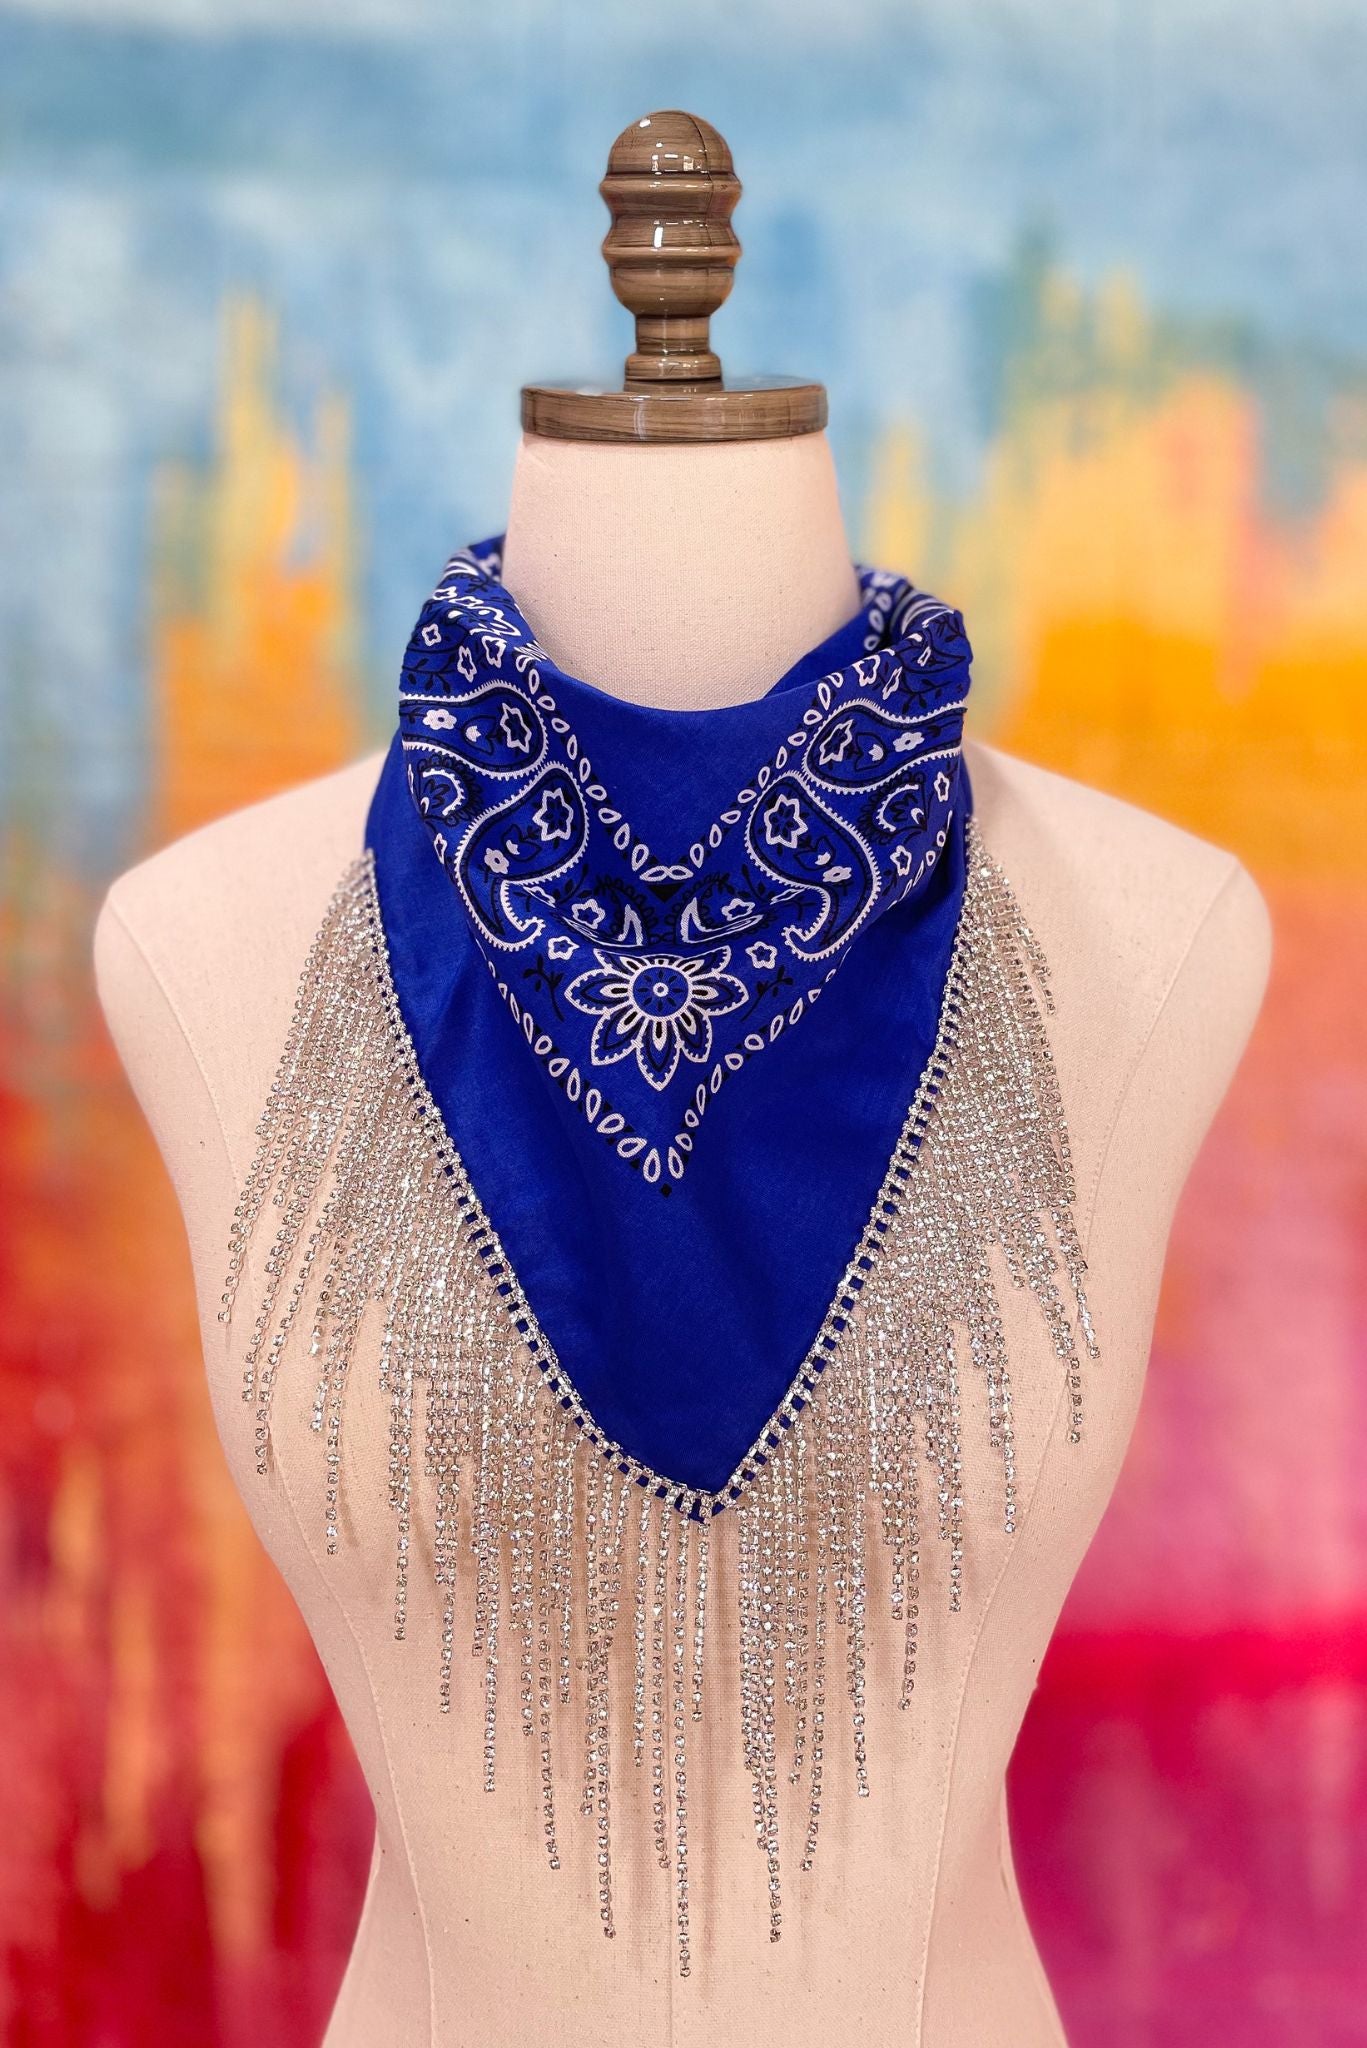 Load image into Gallery viewer, Royal Blue Rhinestone Fringe Bandana, concert ready, must have accessory, fall transition piece, mom style, updated bandana, shop style your senses by mallory fitzsimmons
